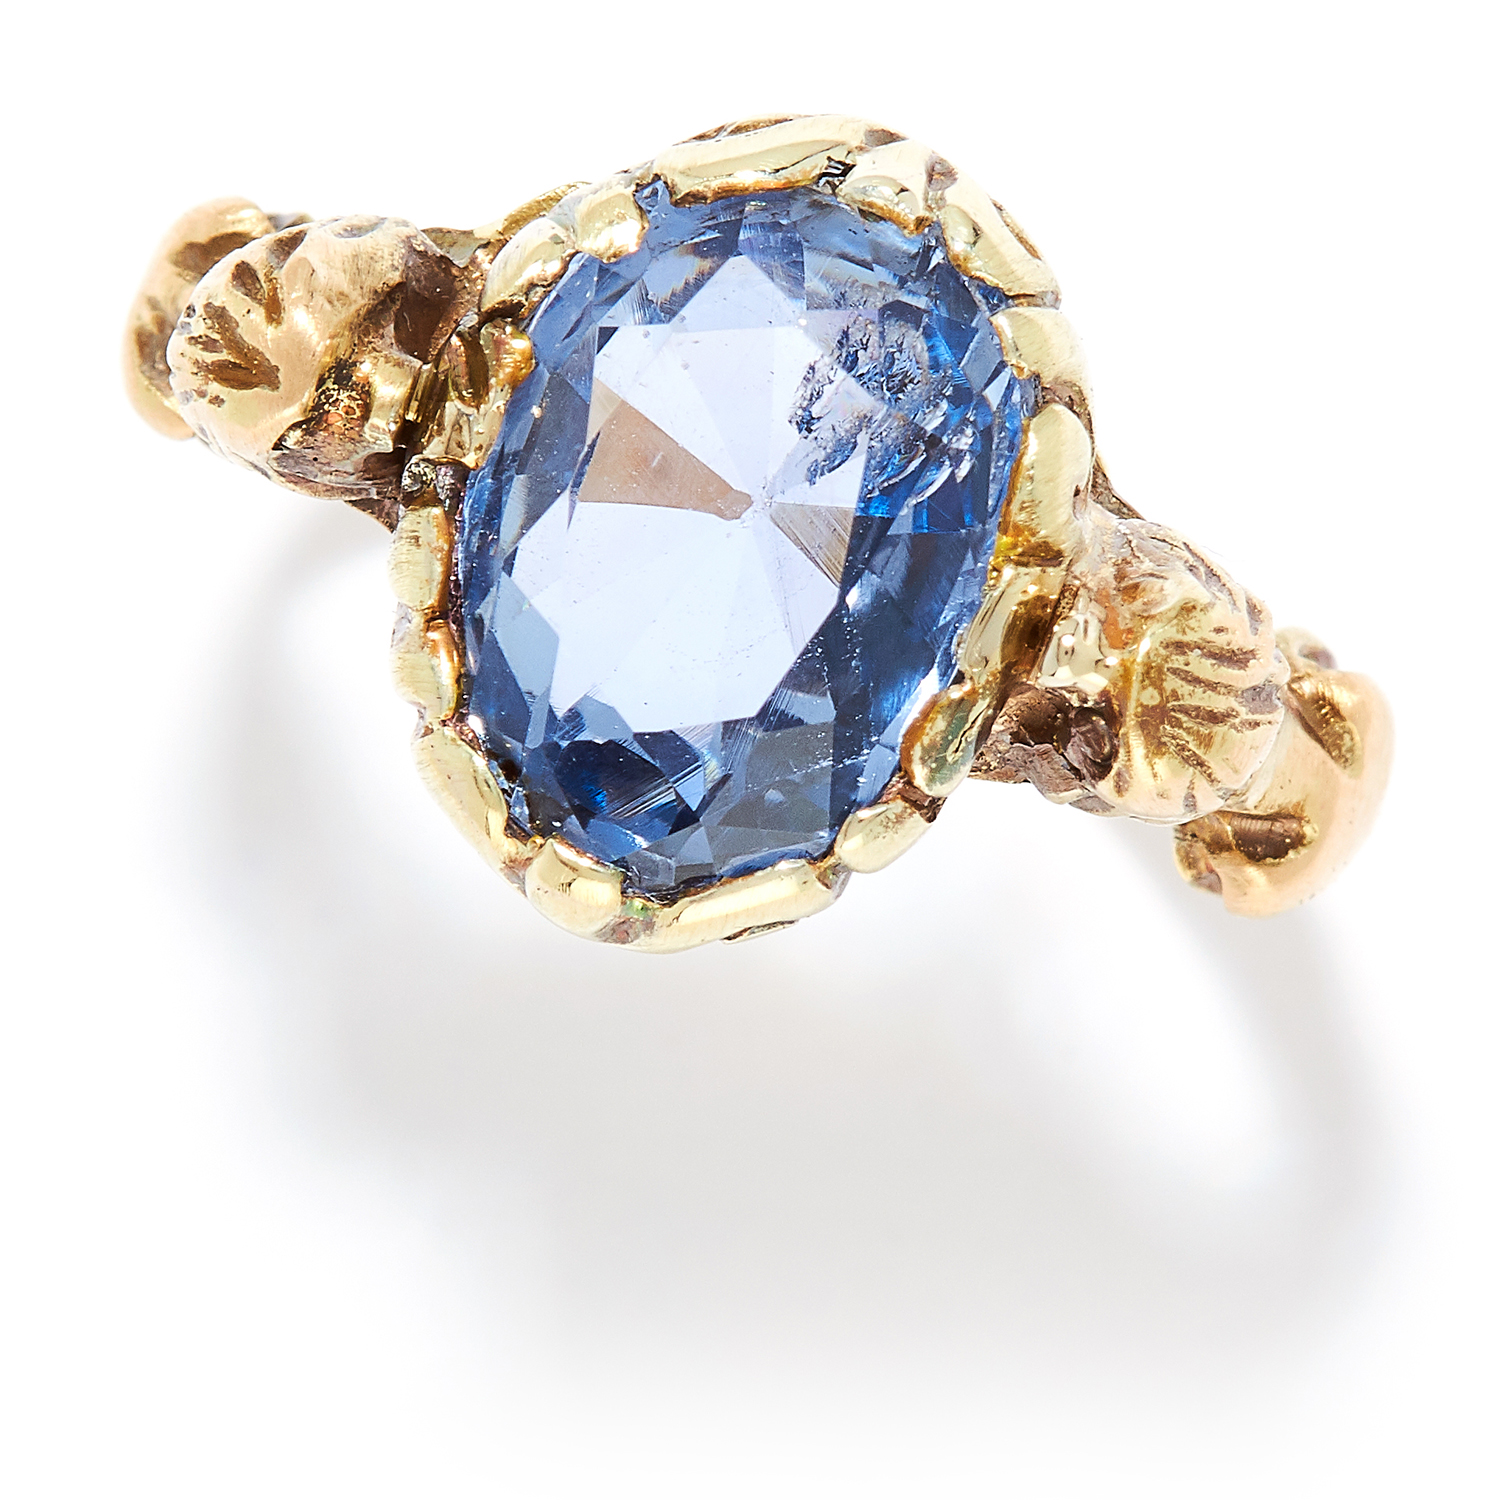 ANTIQUE CEYLON NO HEAT SAPPHIRE RING in high carat yellow gold, set with an oval cut sapphire of 4.